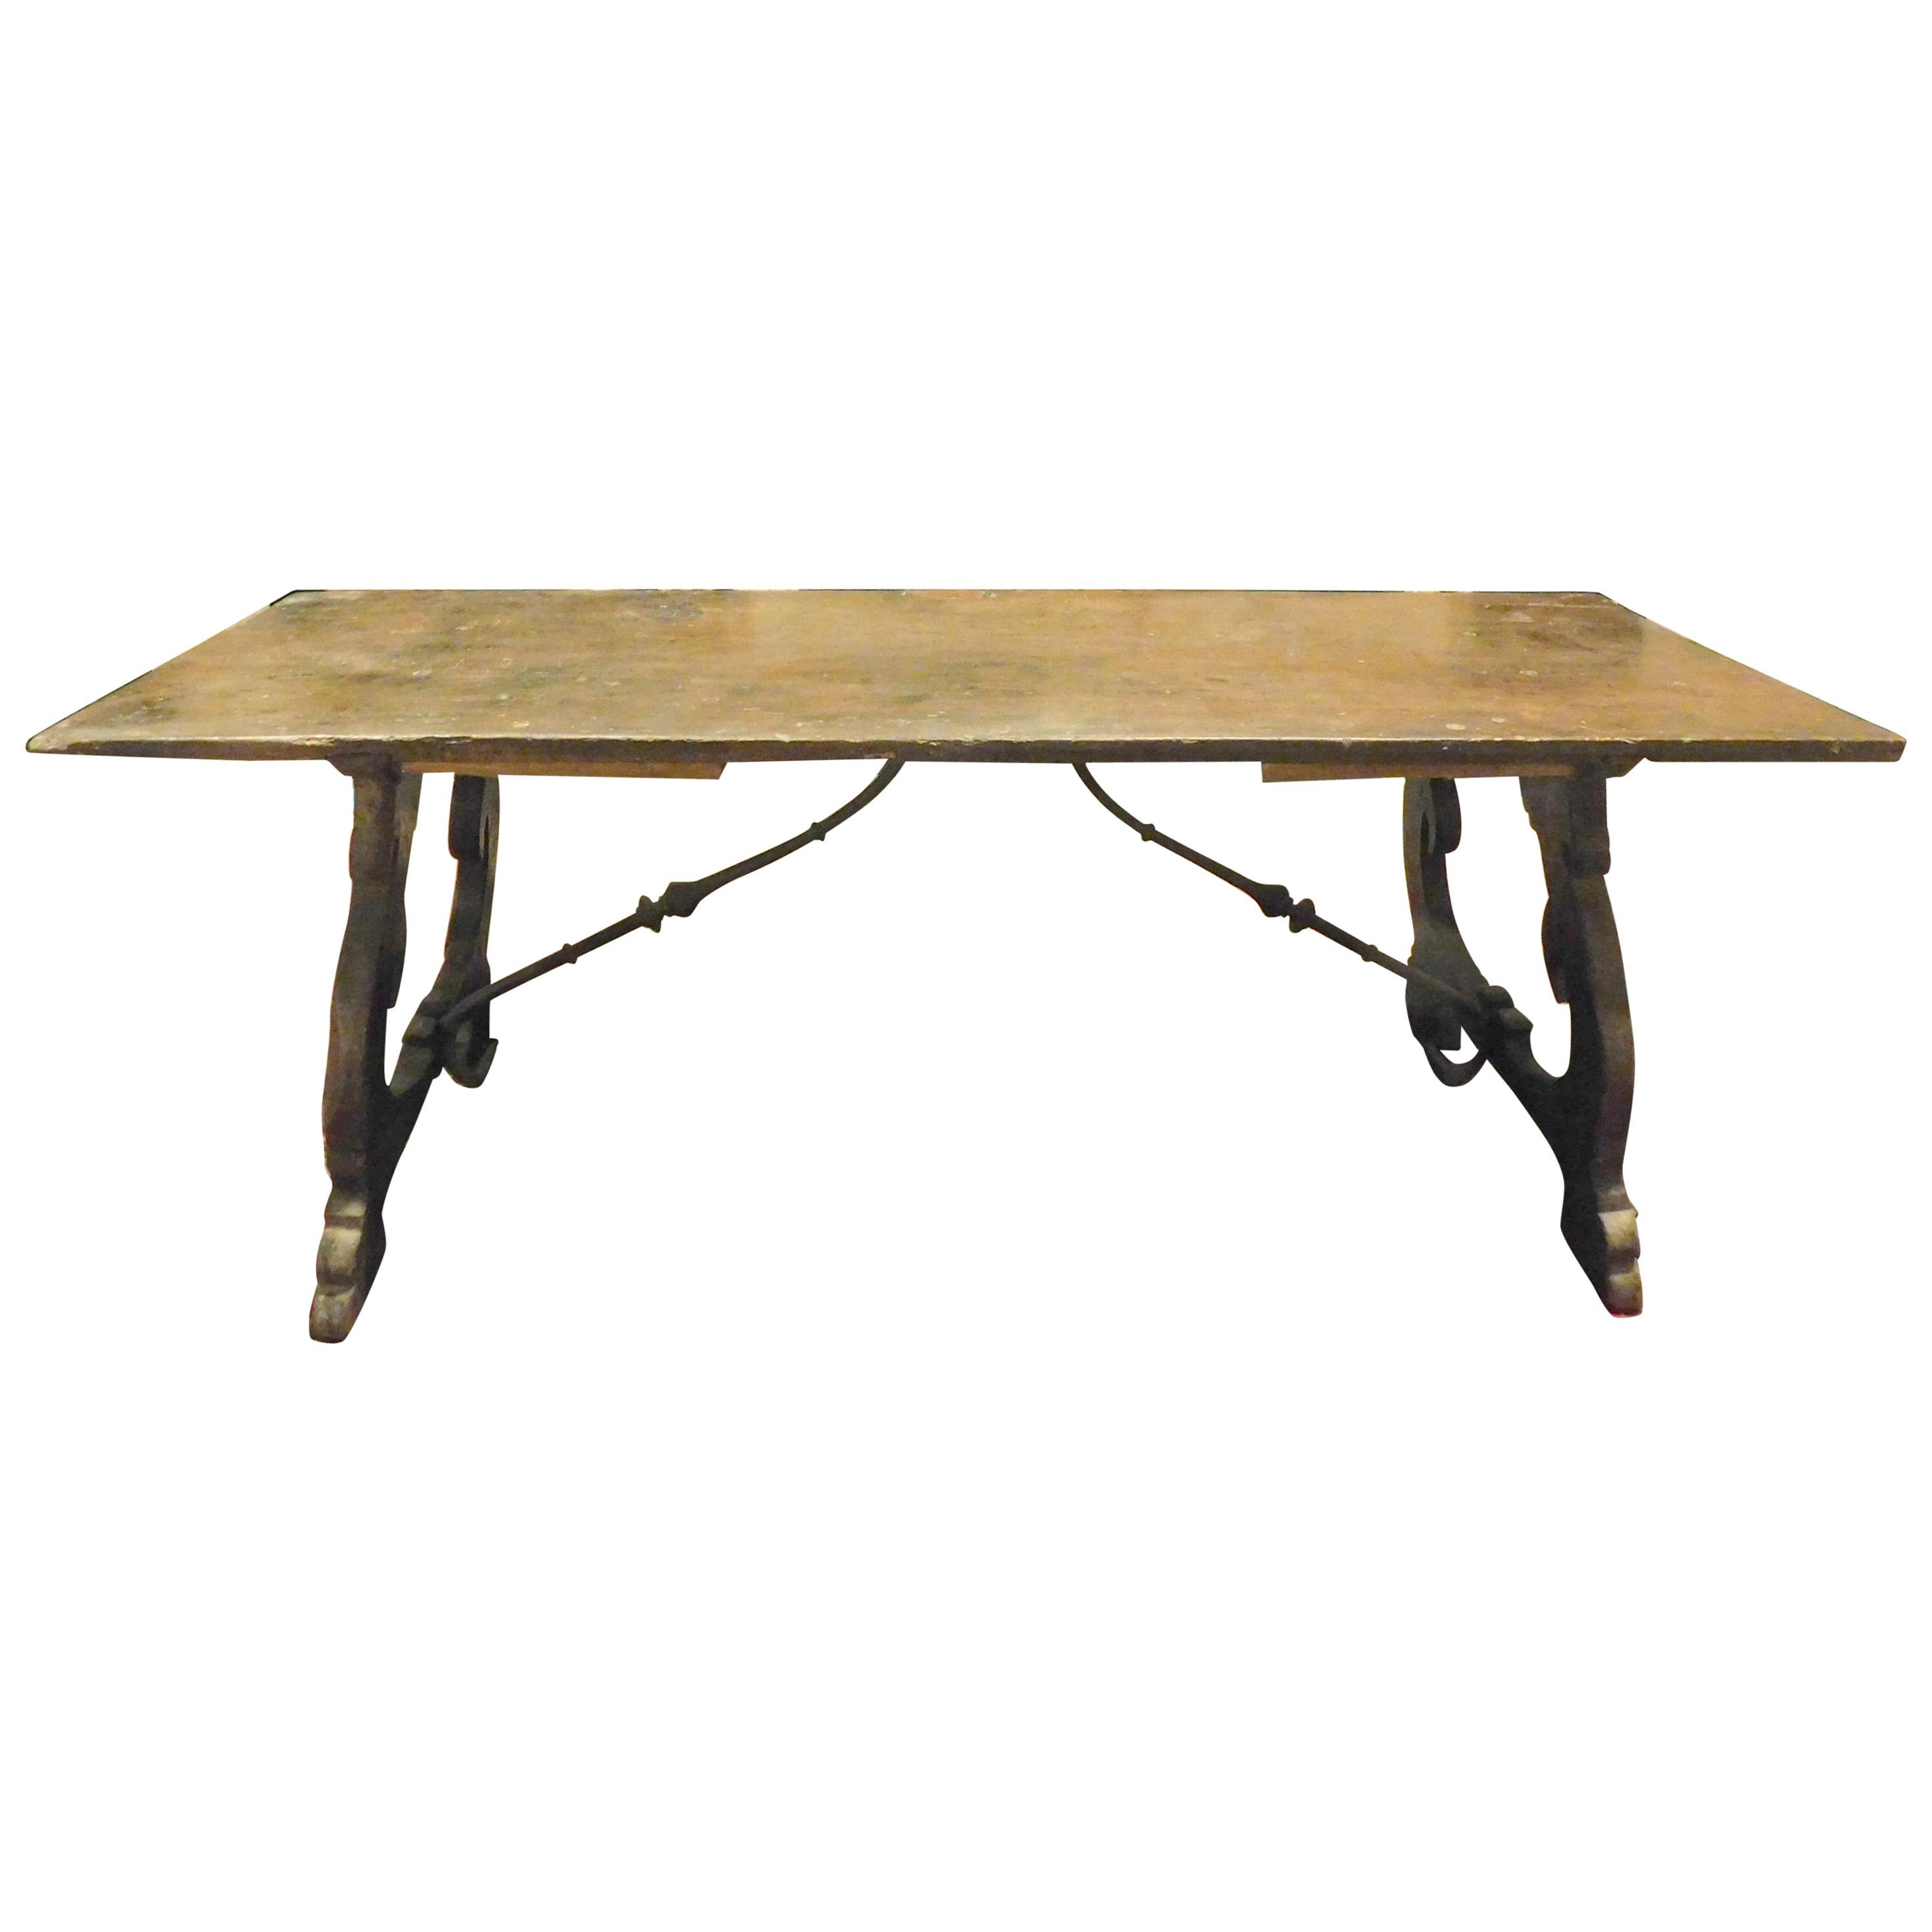 Antique Refectory Table in Walnut and Oak, Single Plank, 18th Century Spain